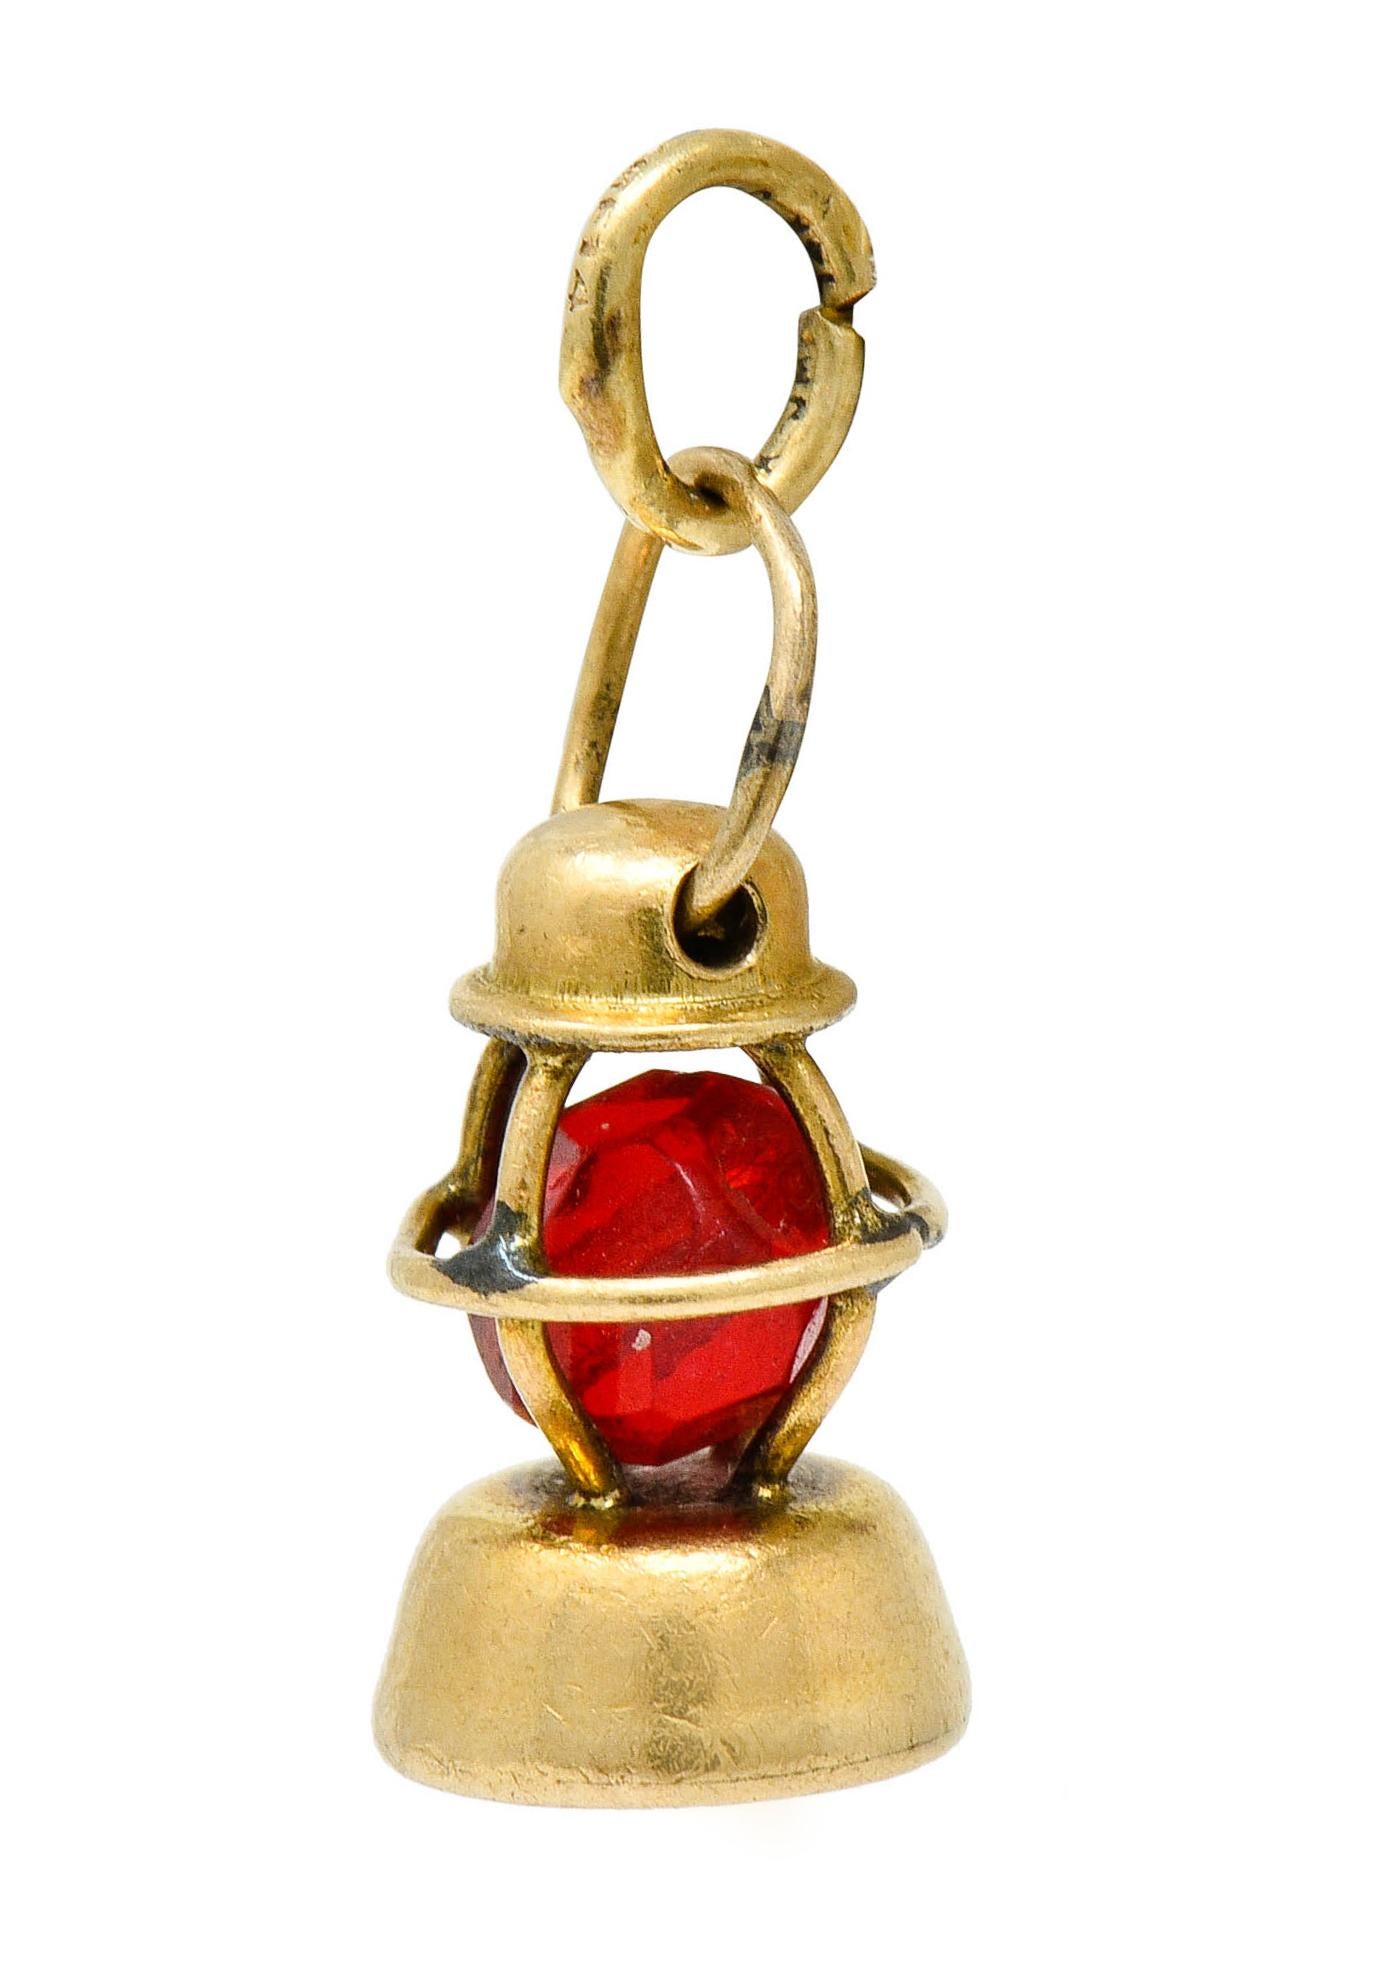 Designed as a nautical lantern with a polished gold top and base

With a gold wire cage surrounding a glowing red glass bead, insinuating a flame

Completed by a jump ring bale

With maker's mark for J.M. Fisher Company and stamped 14K for 14 karat